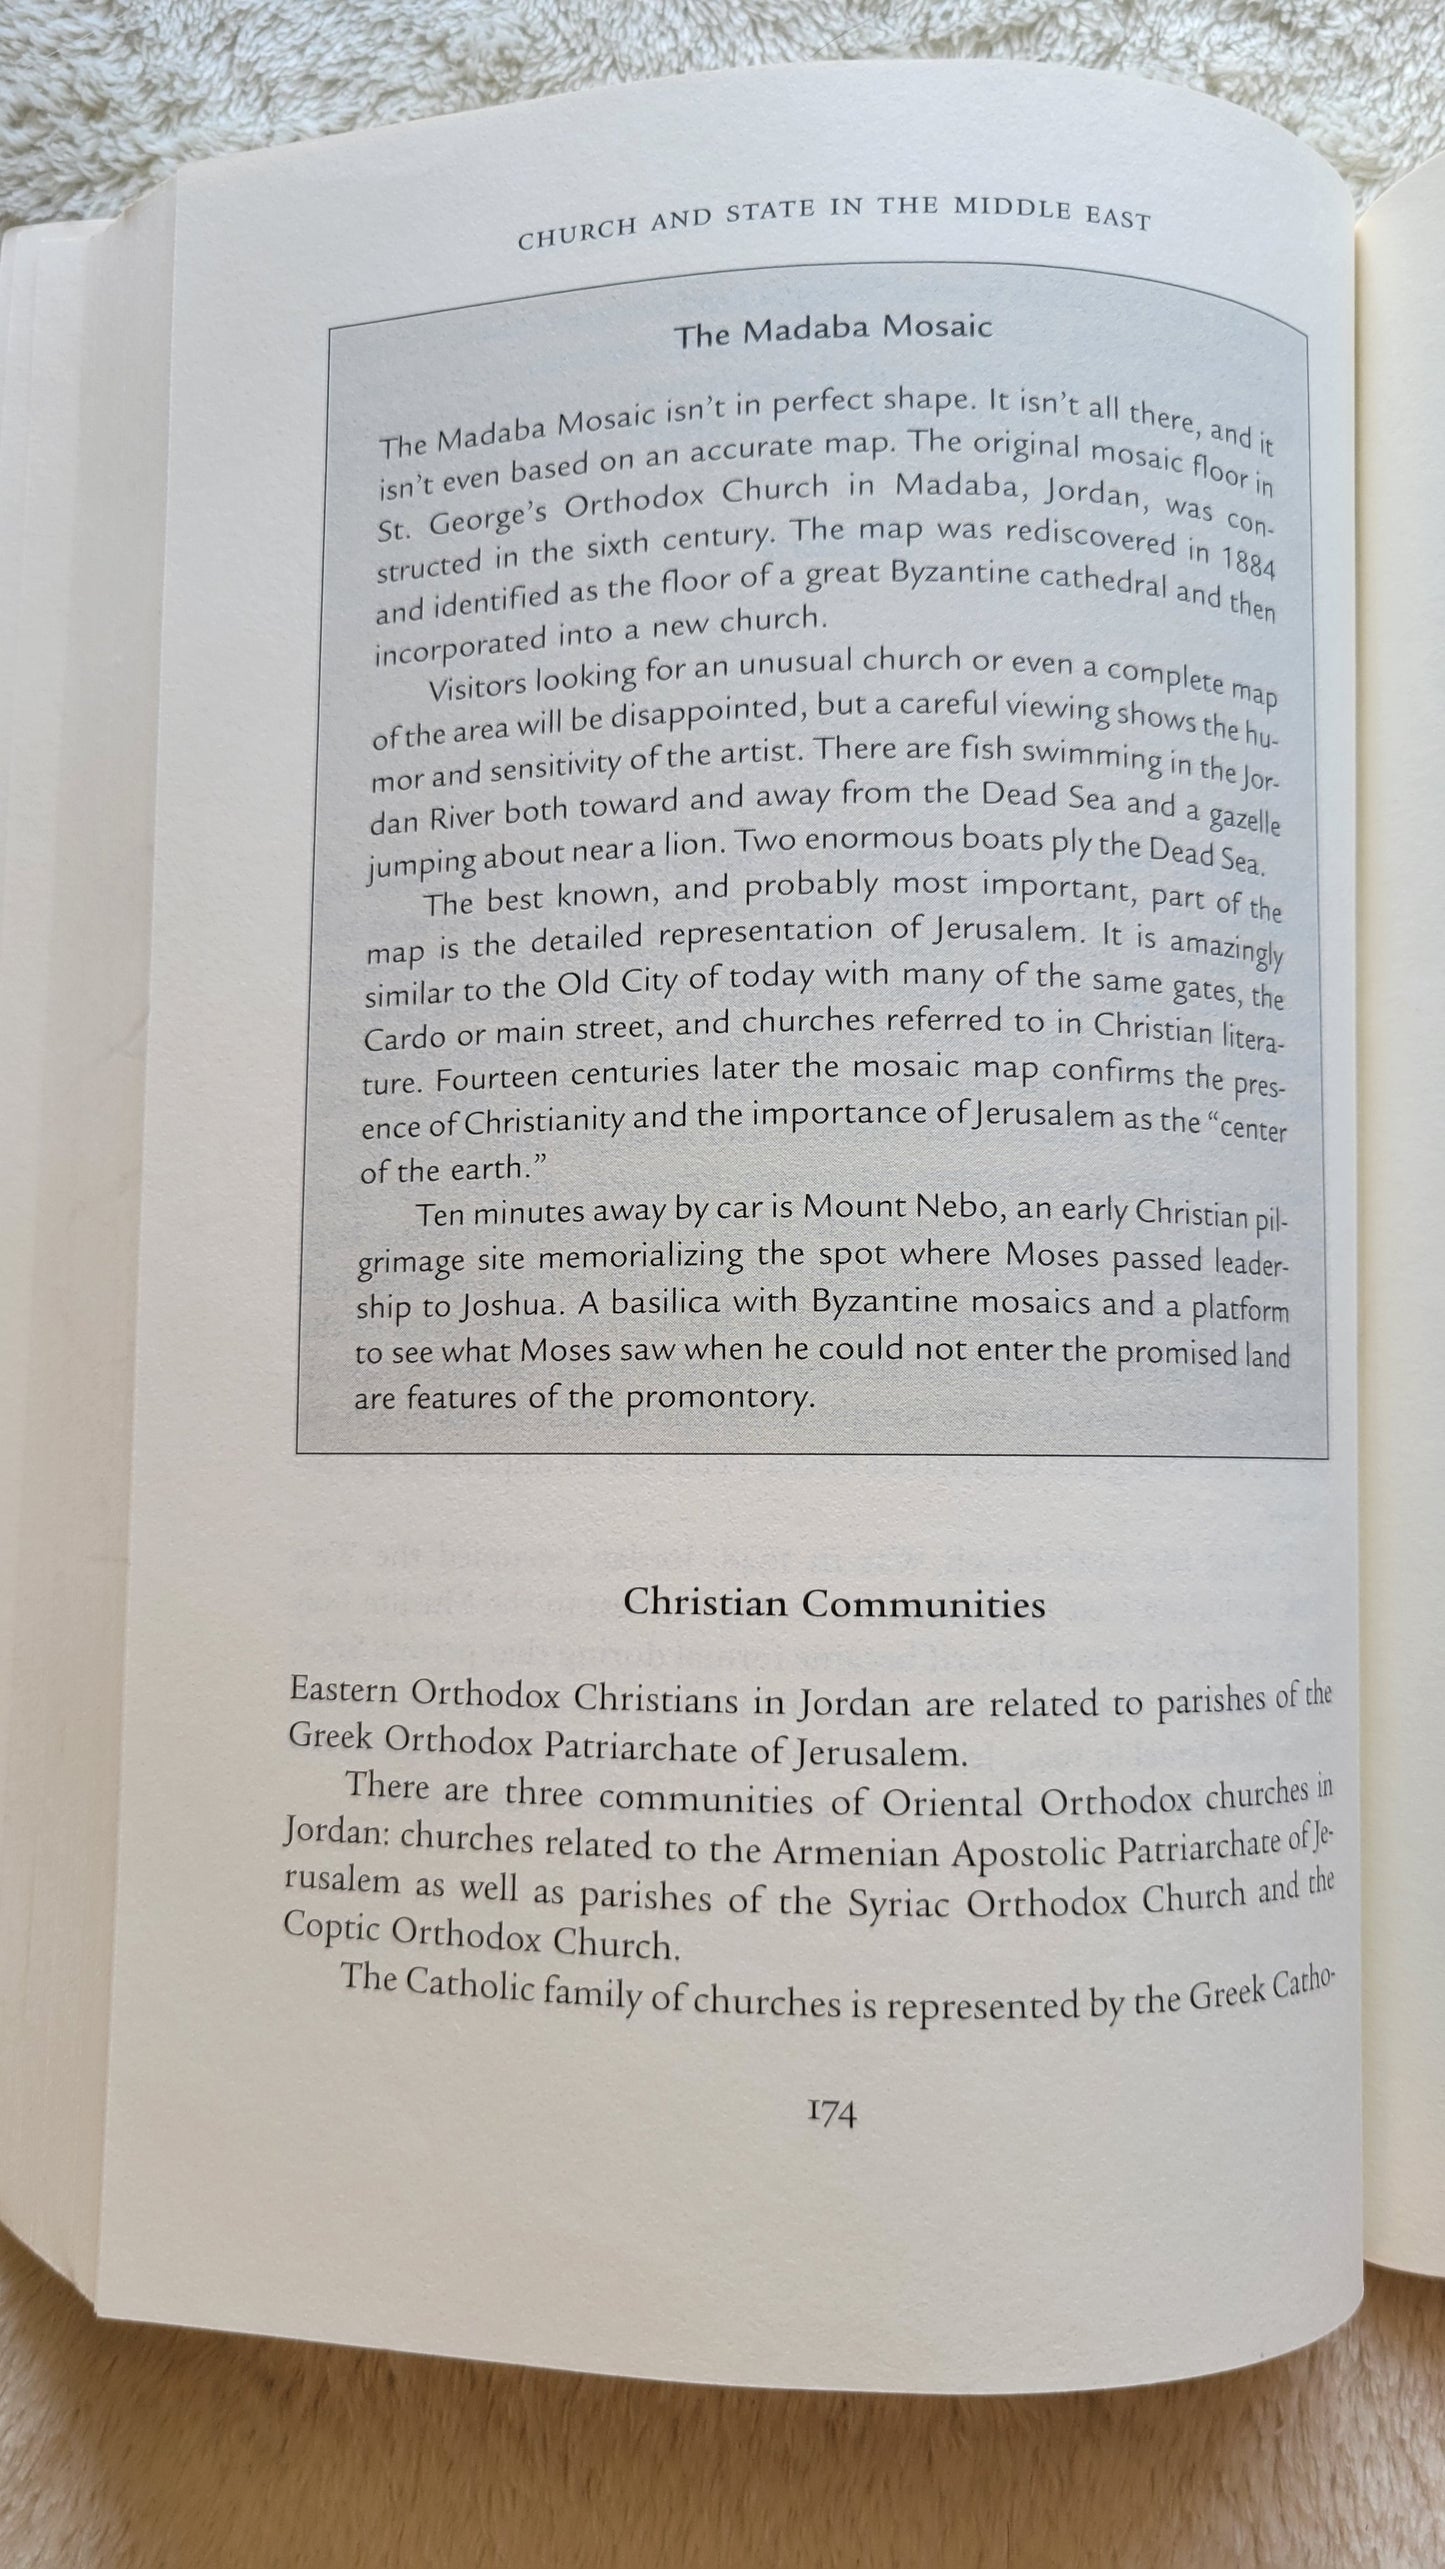 Used book for sale "Who Are the Christians in the Middle East?" Second Edition, by Betty Jane Bailey & J. Martin Bailey, published by Wm. B. Eerdmans Publishing Co. in 2010. Page 174